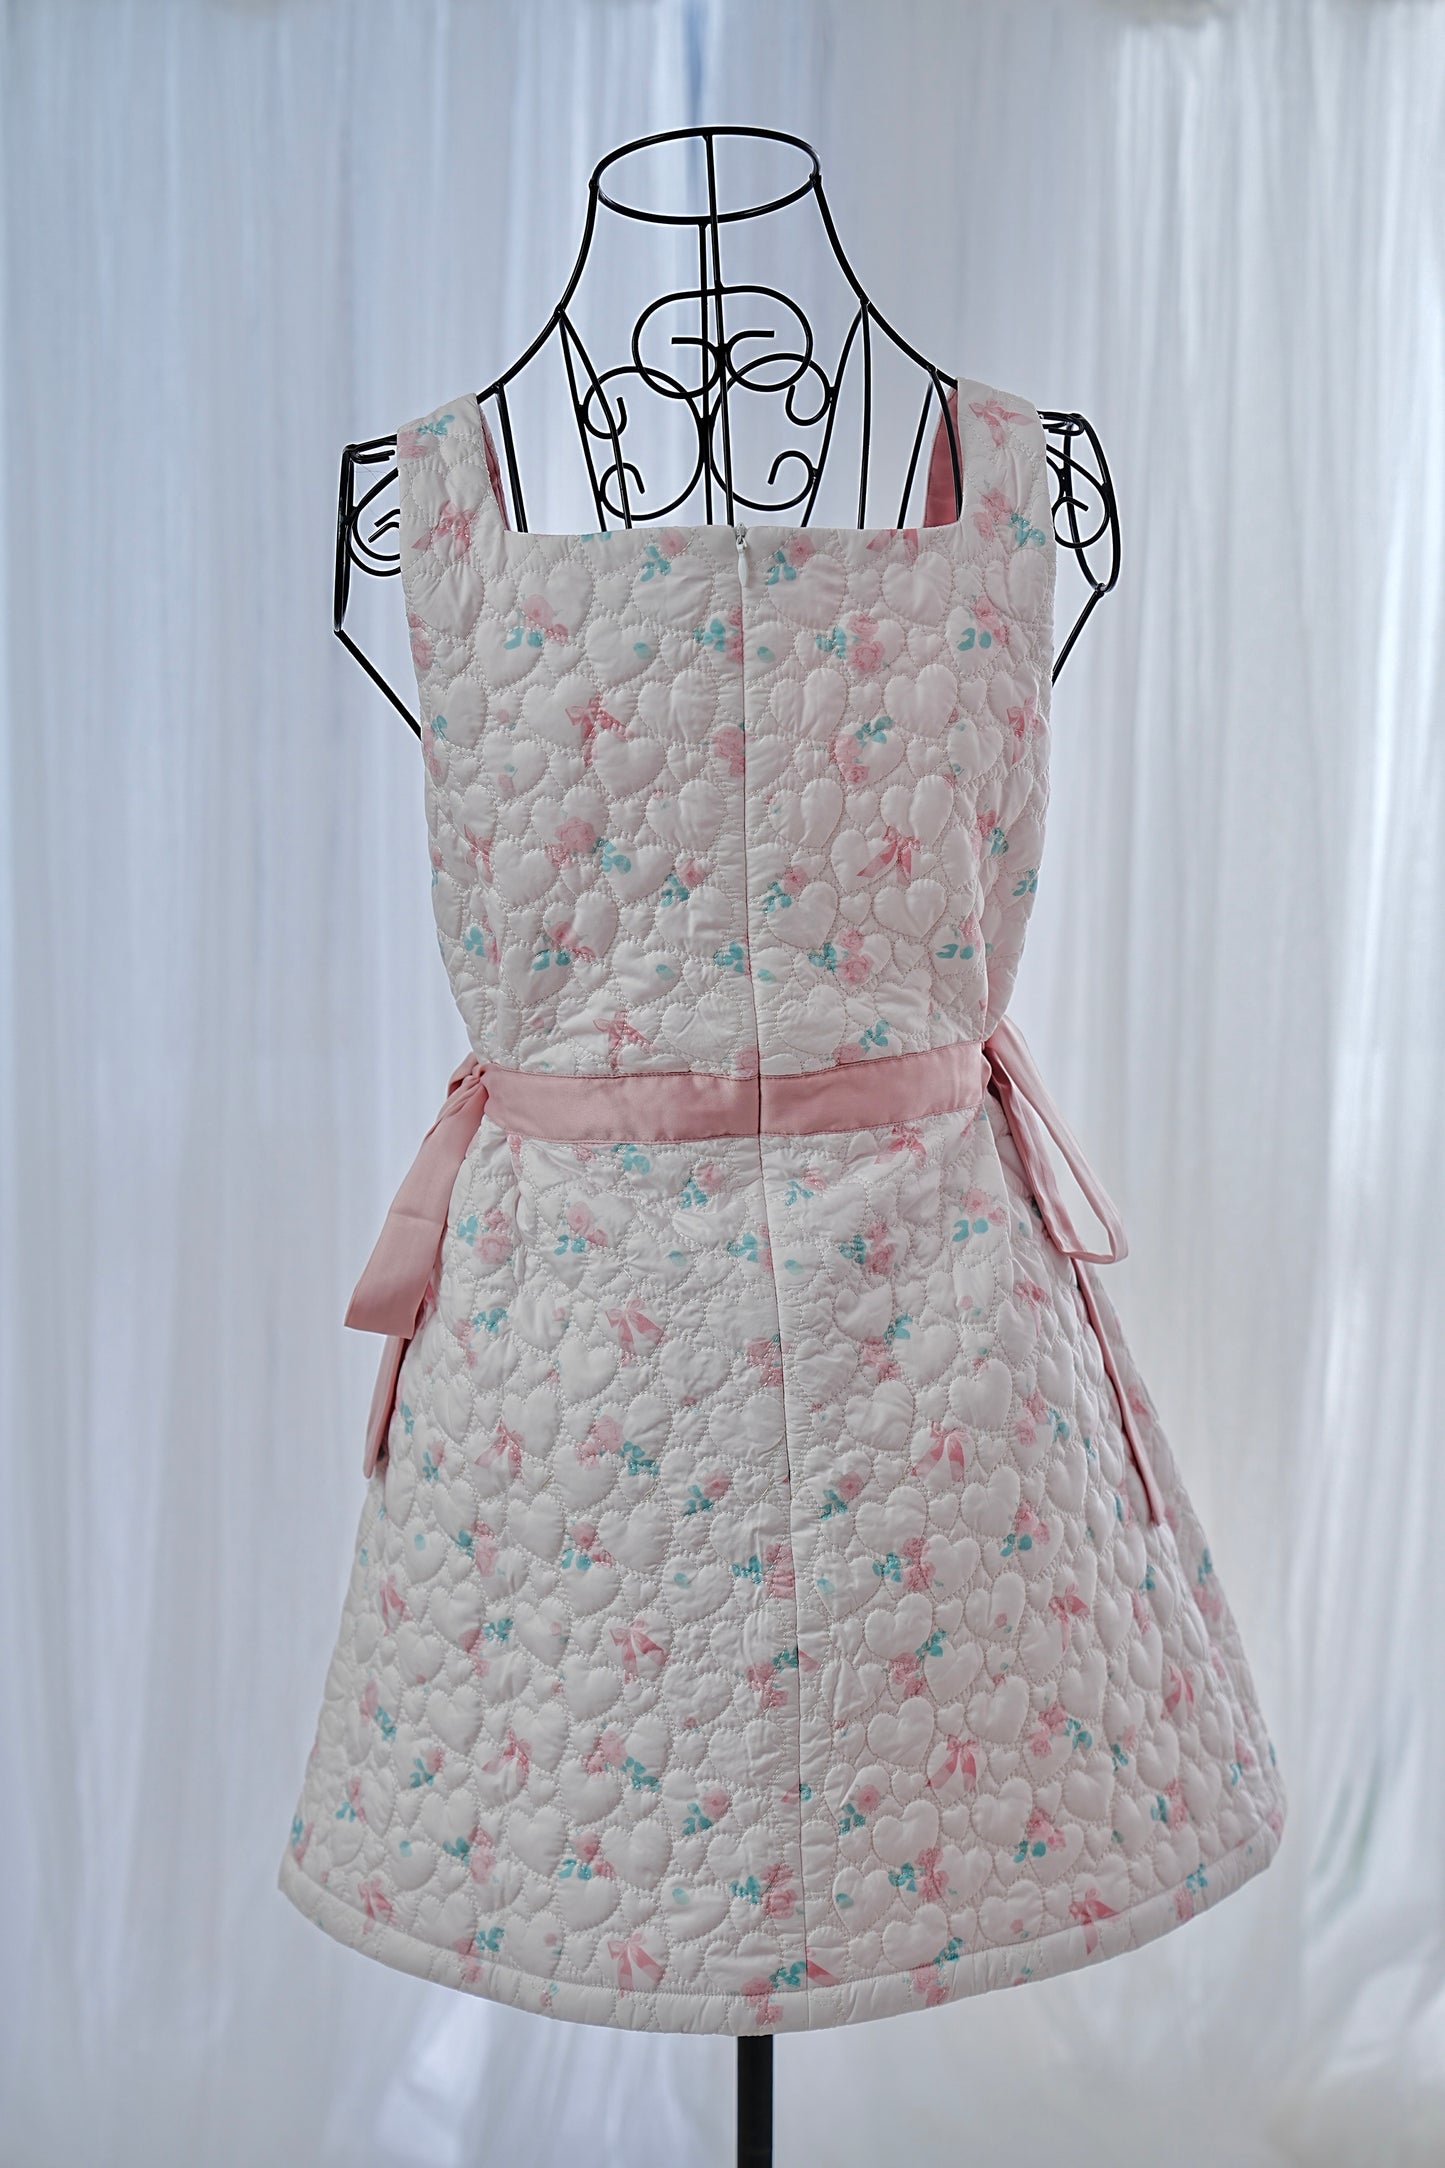 Roses & Ribbons Quilted DRESS